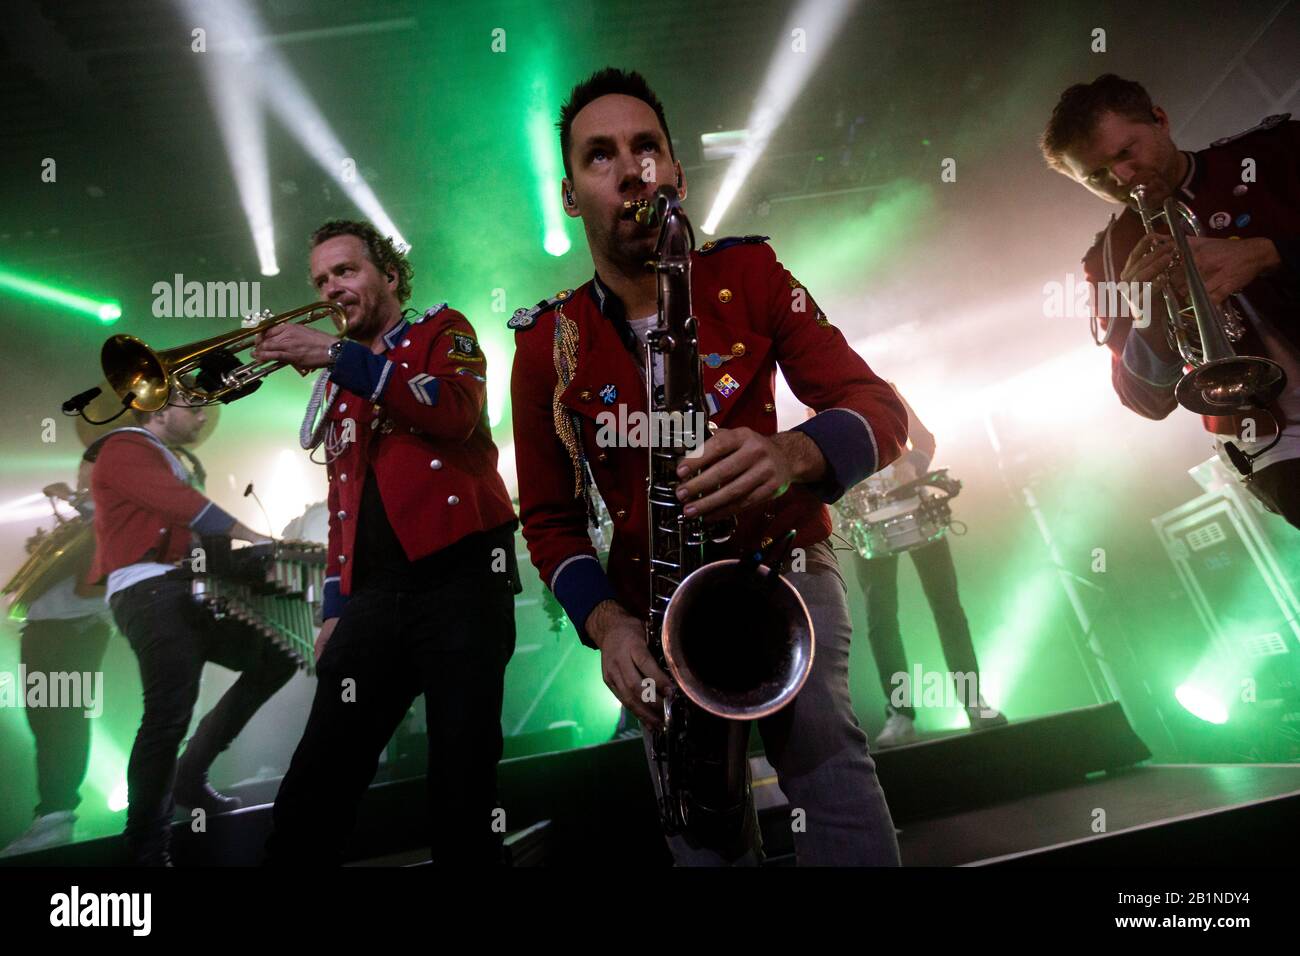 Self-described techno marching band from Germany, Meute, is seen performing  live at Hard Club in Porto, Portugal Stock Photo - Alamy